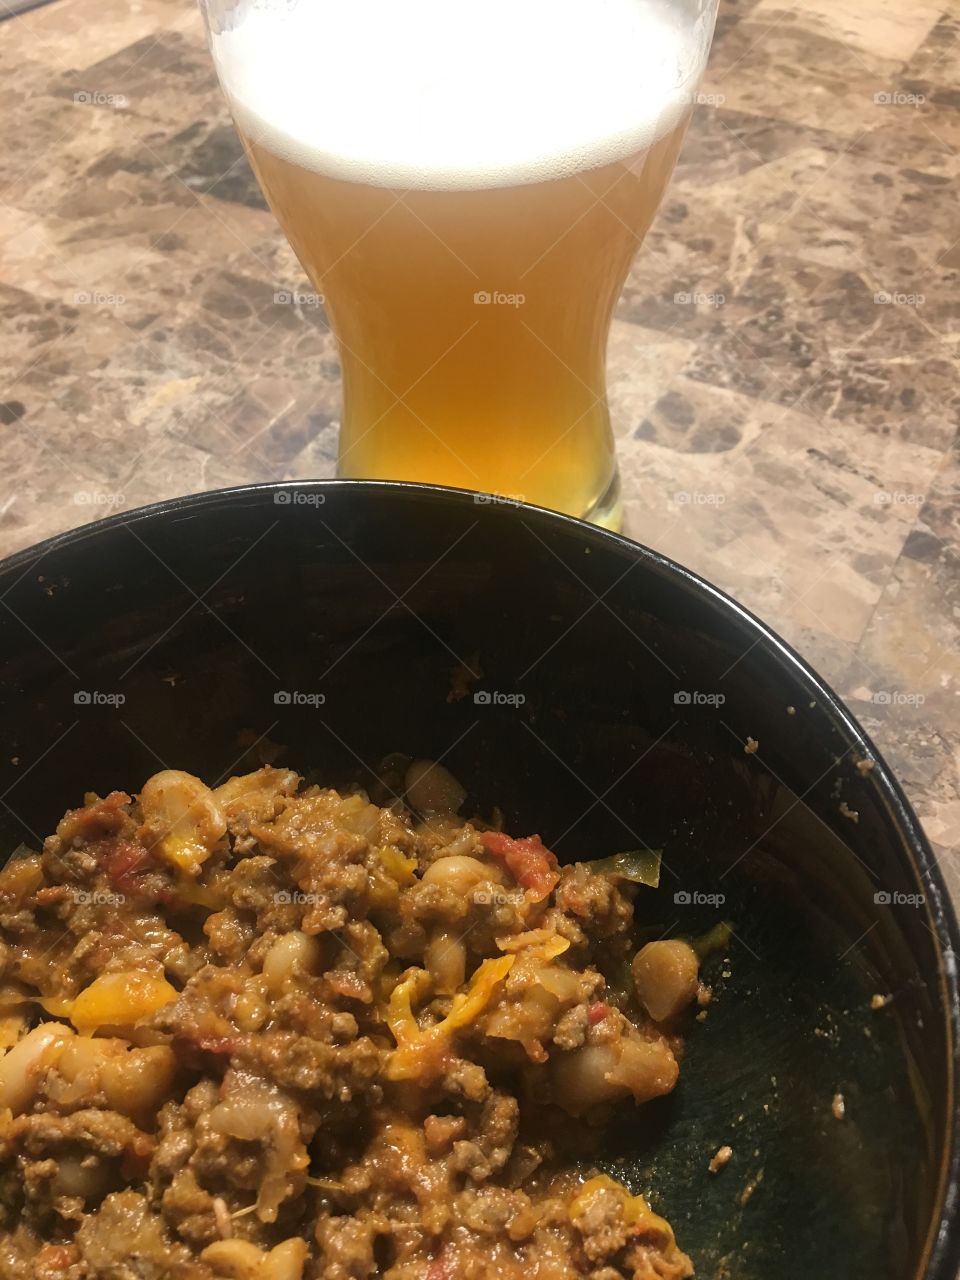 Chili and beer 